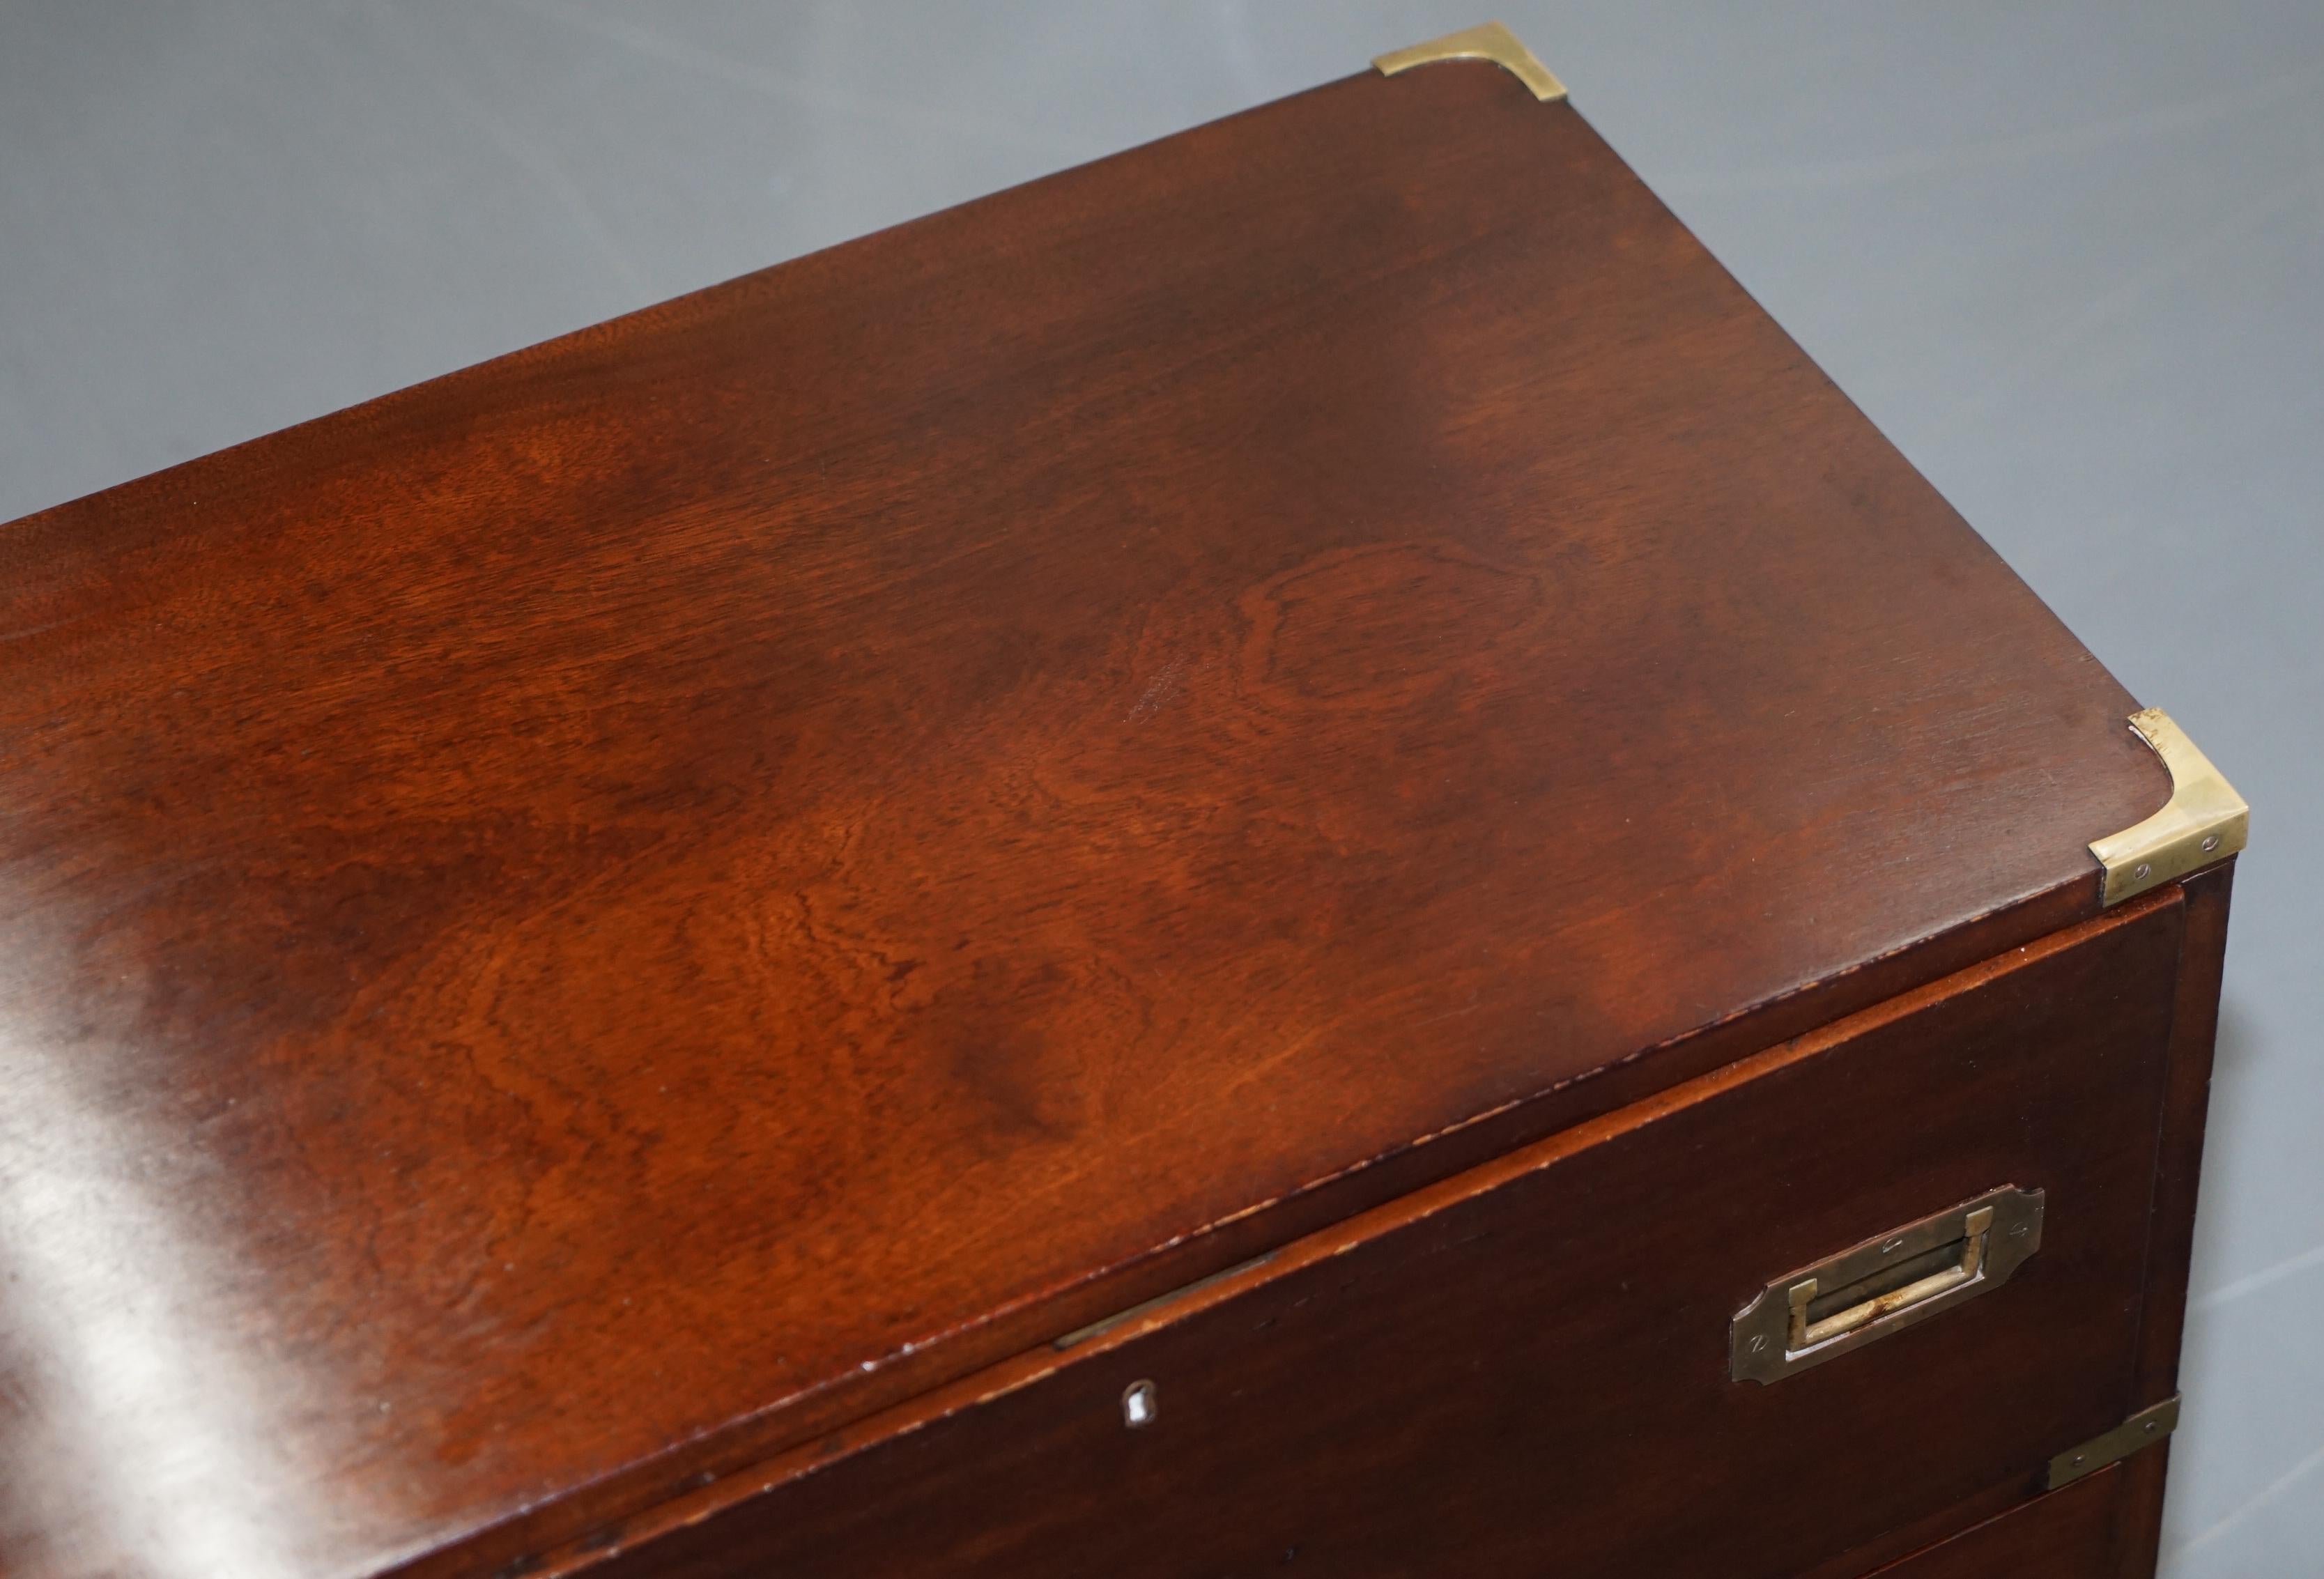 Hand-Crafted Vintage Military Campaign Chest of Drawers, Built in Secrataire Drop Front Desk